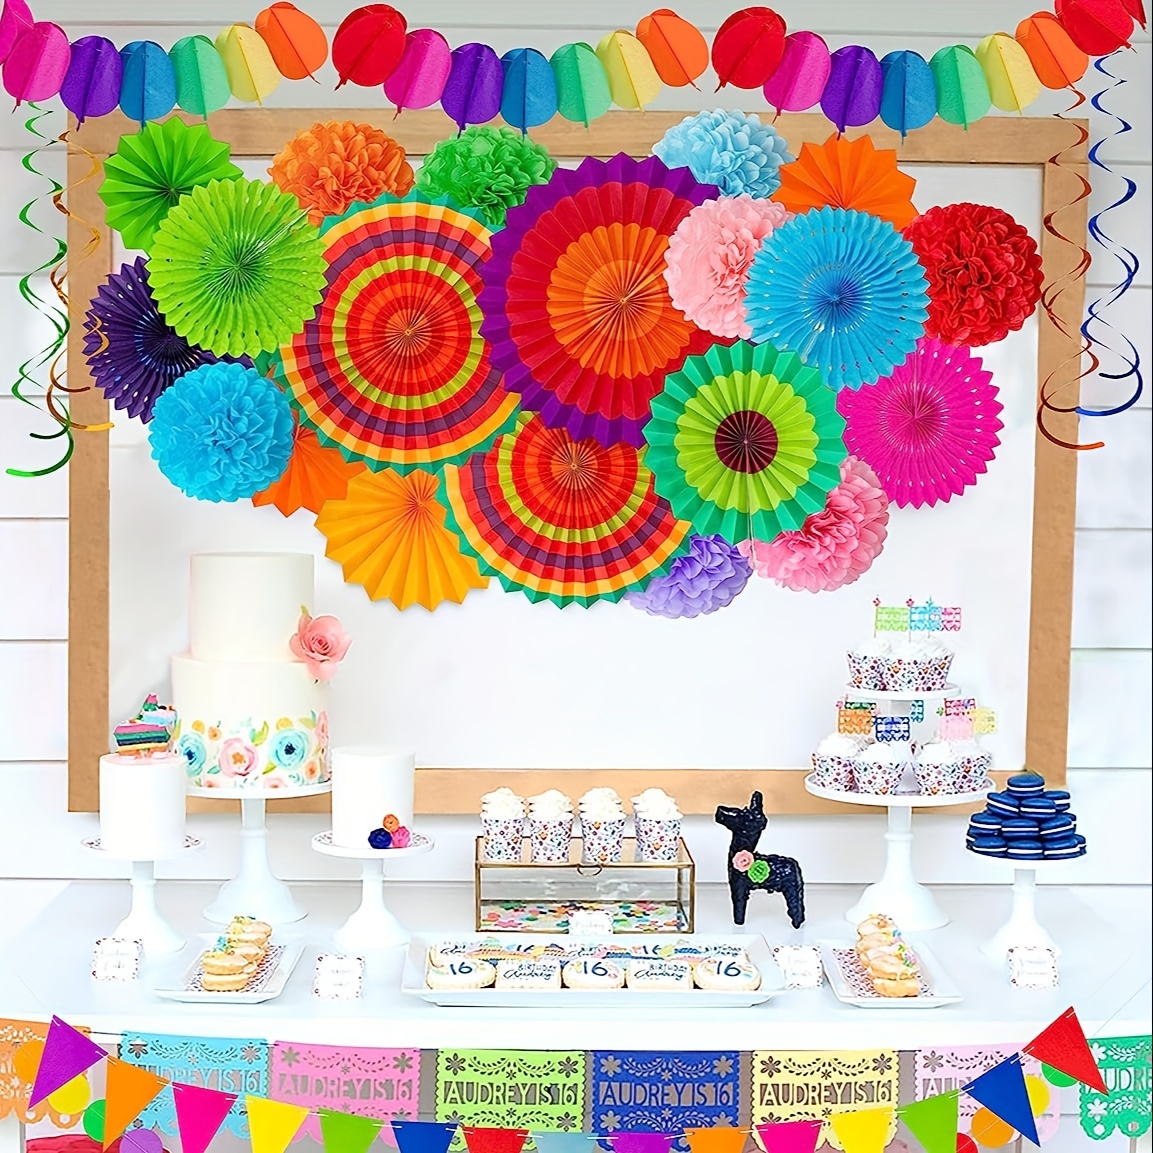  26 PCs Mexican Party Decorations Fiesta Themed, Hanging Paper  Fans, Hanging Swirls, Pom Poms Flowers, Picado Banner for cinco de mayo  decorations, Birthday Parties Wedding Baby Shower Décorrations Set : Home